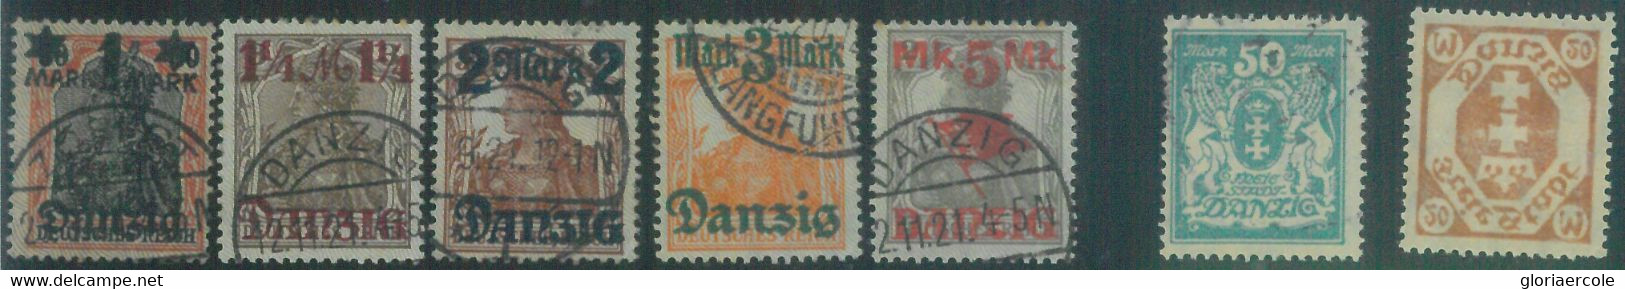 88258 - POLAND Danzig - STAMP  - Small  Lot Of USED STAMPS - Bezetting